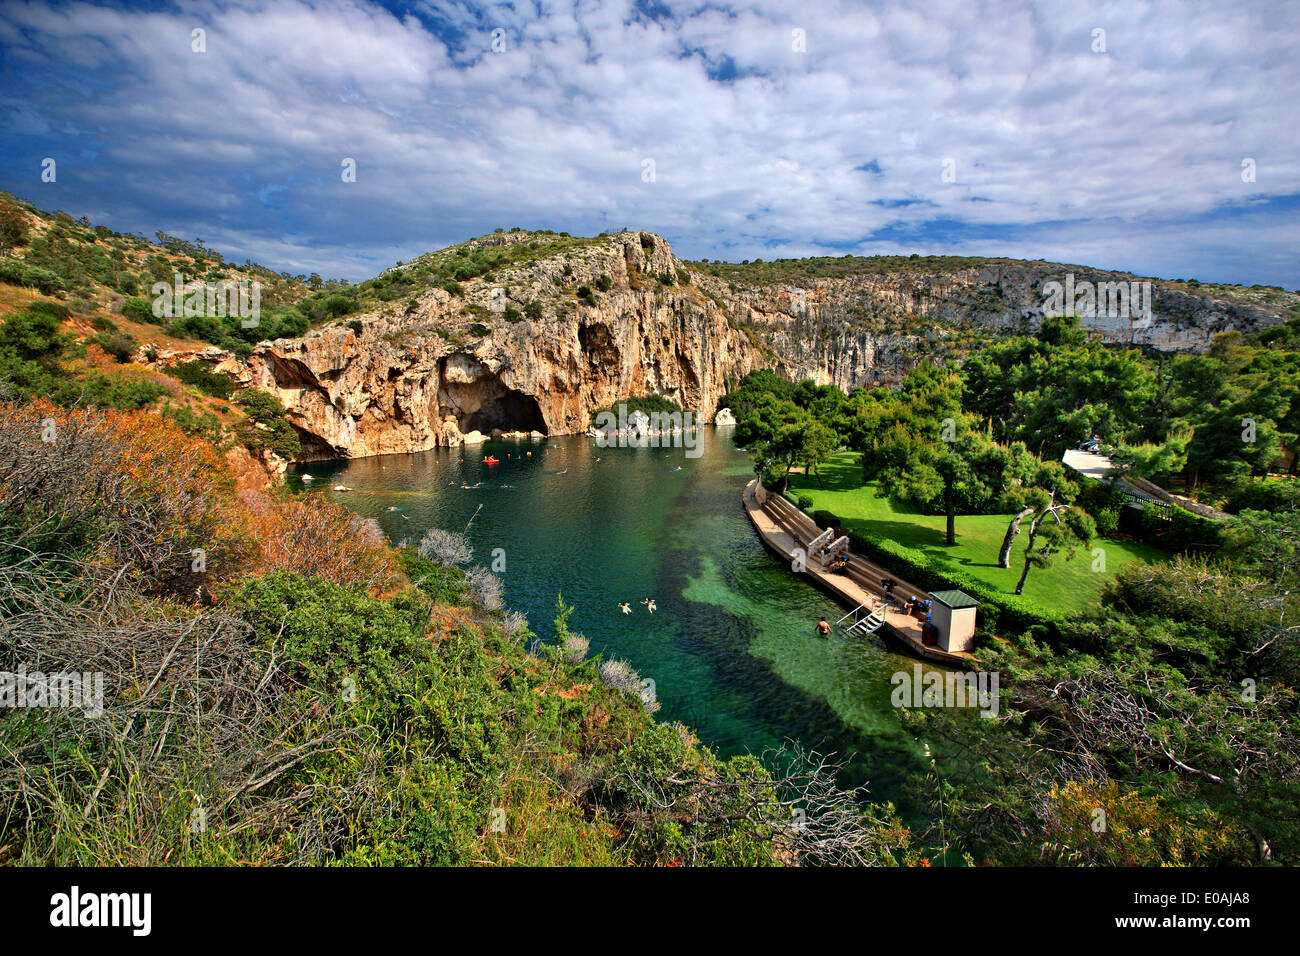 The Vouliagmeni lake, ideal place for relaxation and wellness treatment in Attica, Greece. Stock Photo